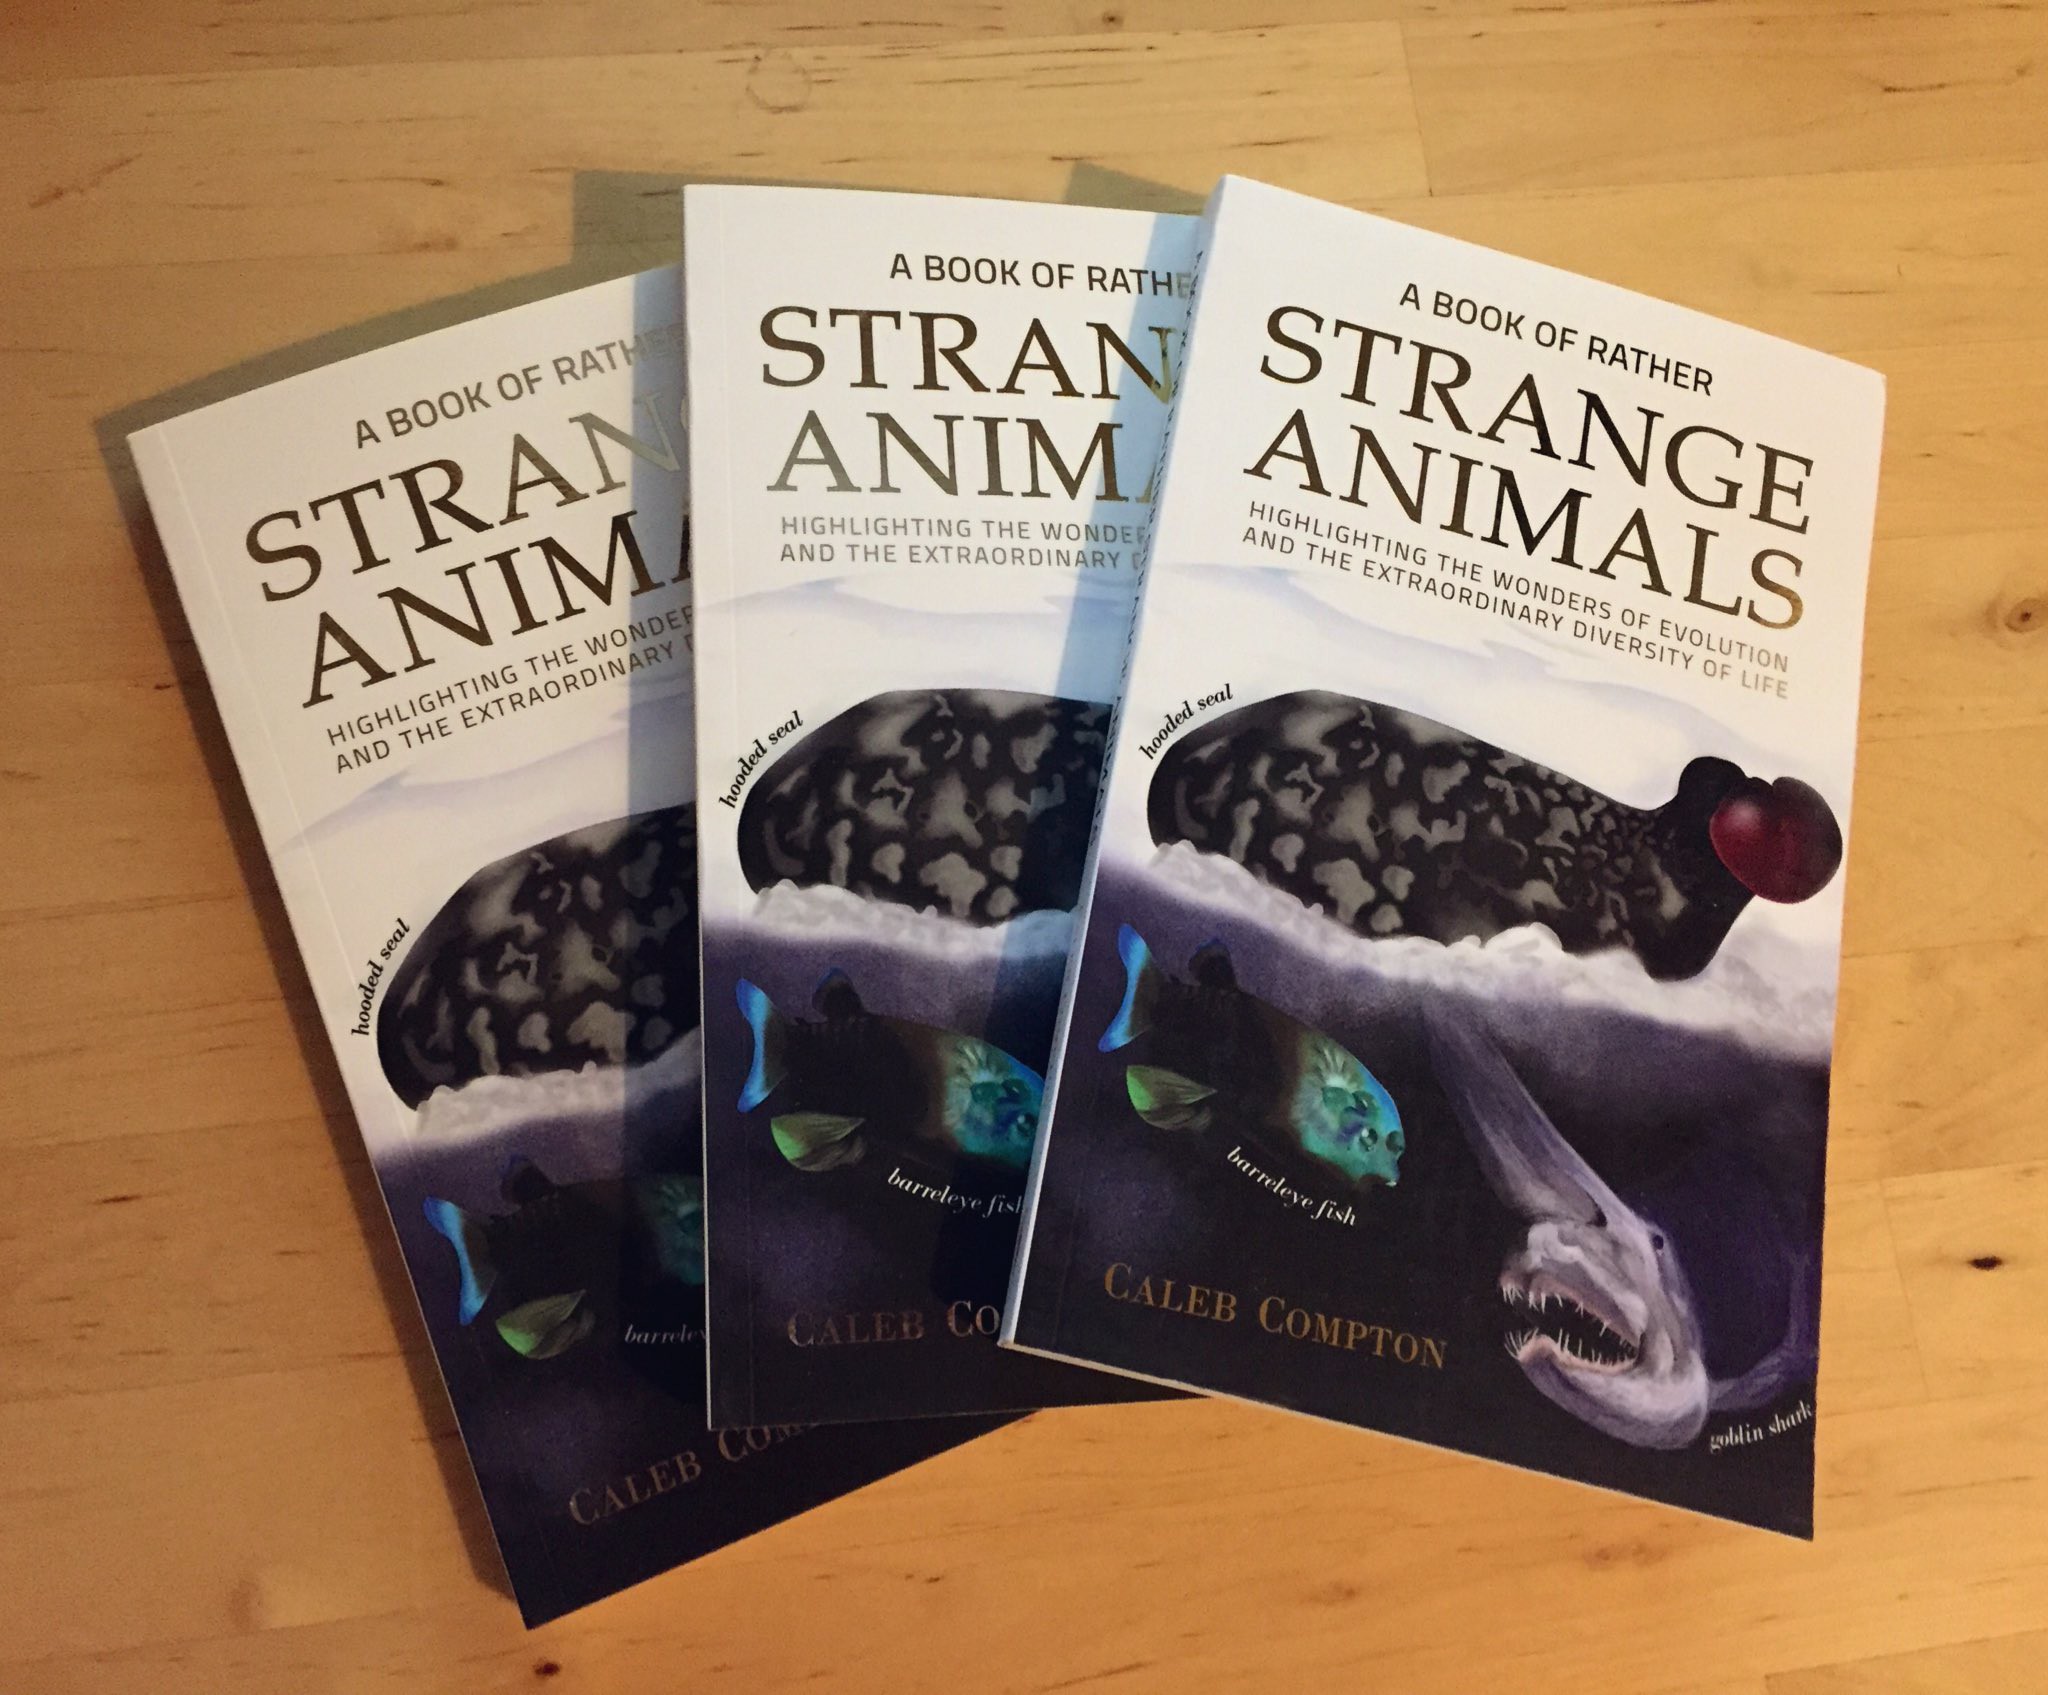 Competition to Win ‘A Book of Rather Strange Animals’ by Caleb Compton